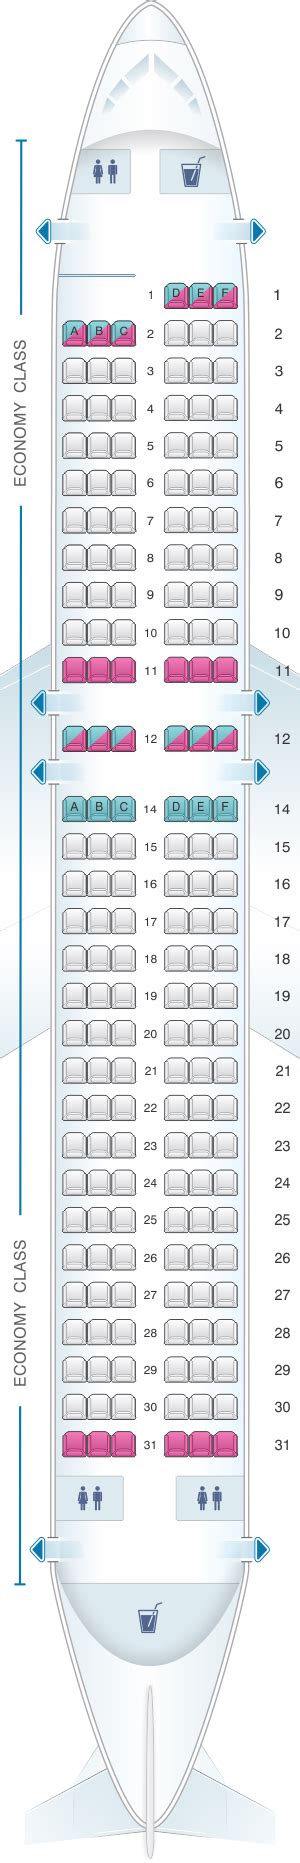 allegiant-seat-map-t-24 - Points with a Crew. Allegiant air seating